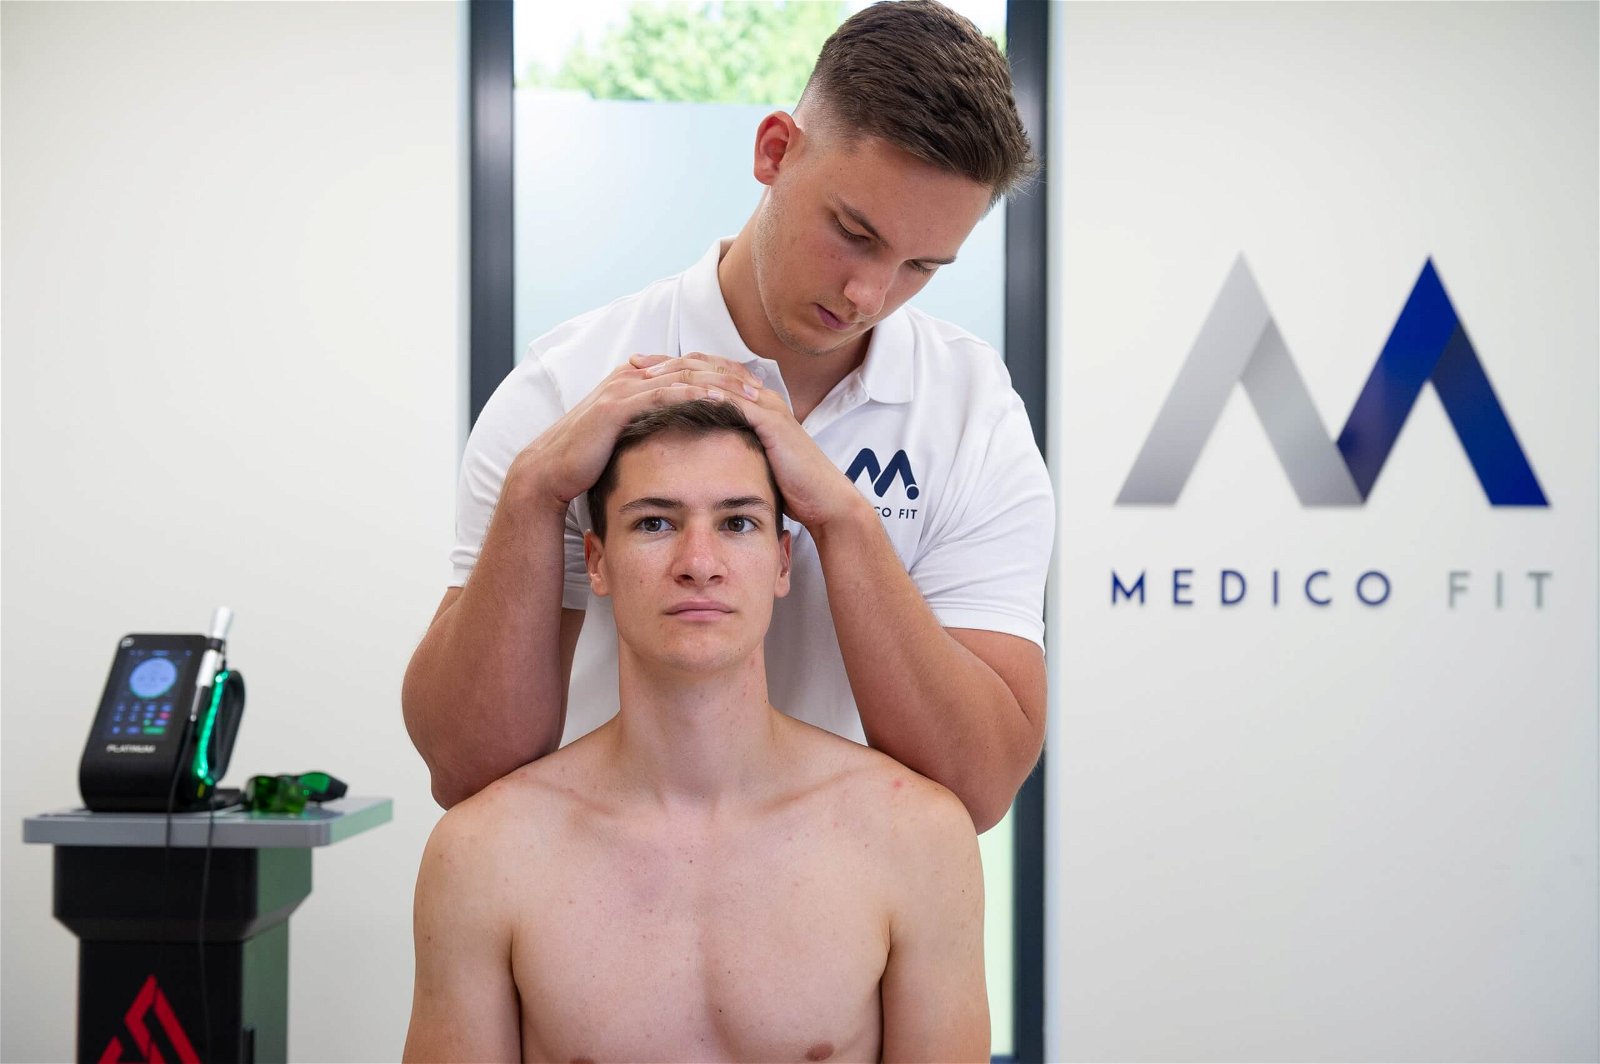 physiotherapy of the neck at the medicofit clinic